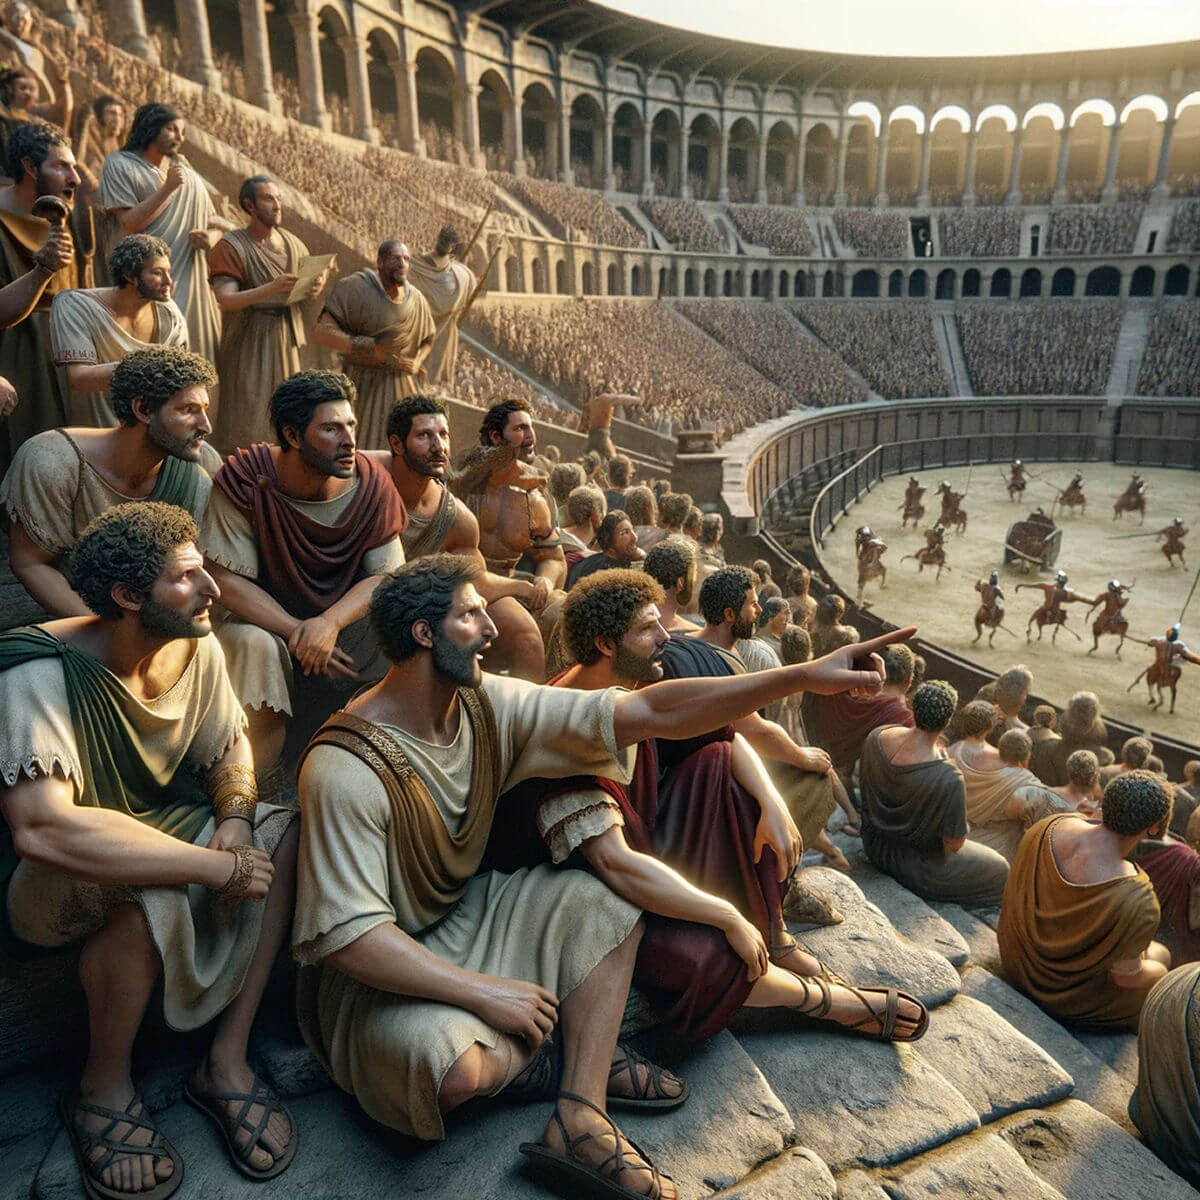 Ancient Romans seated in the Colosseum enjoying the gladiator games